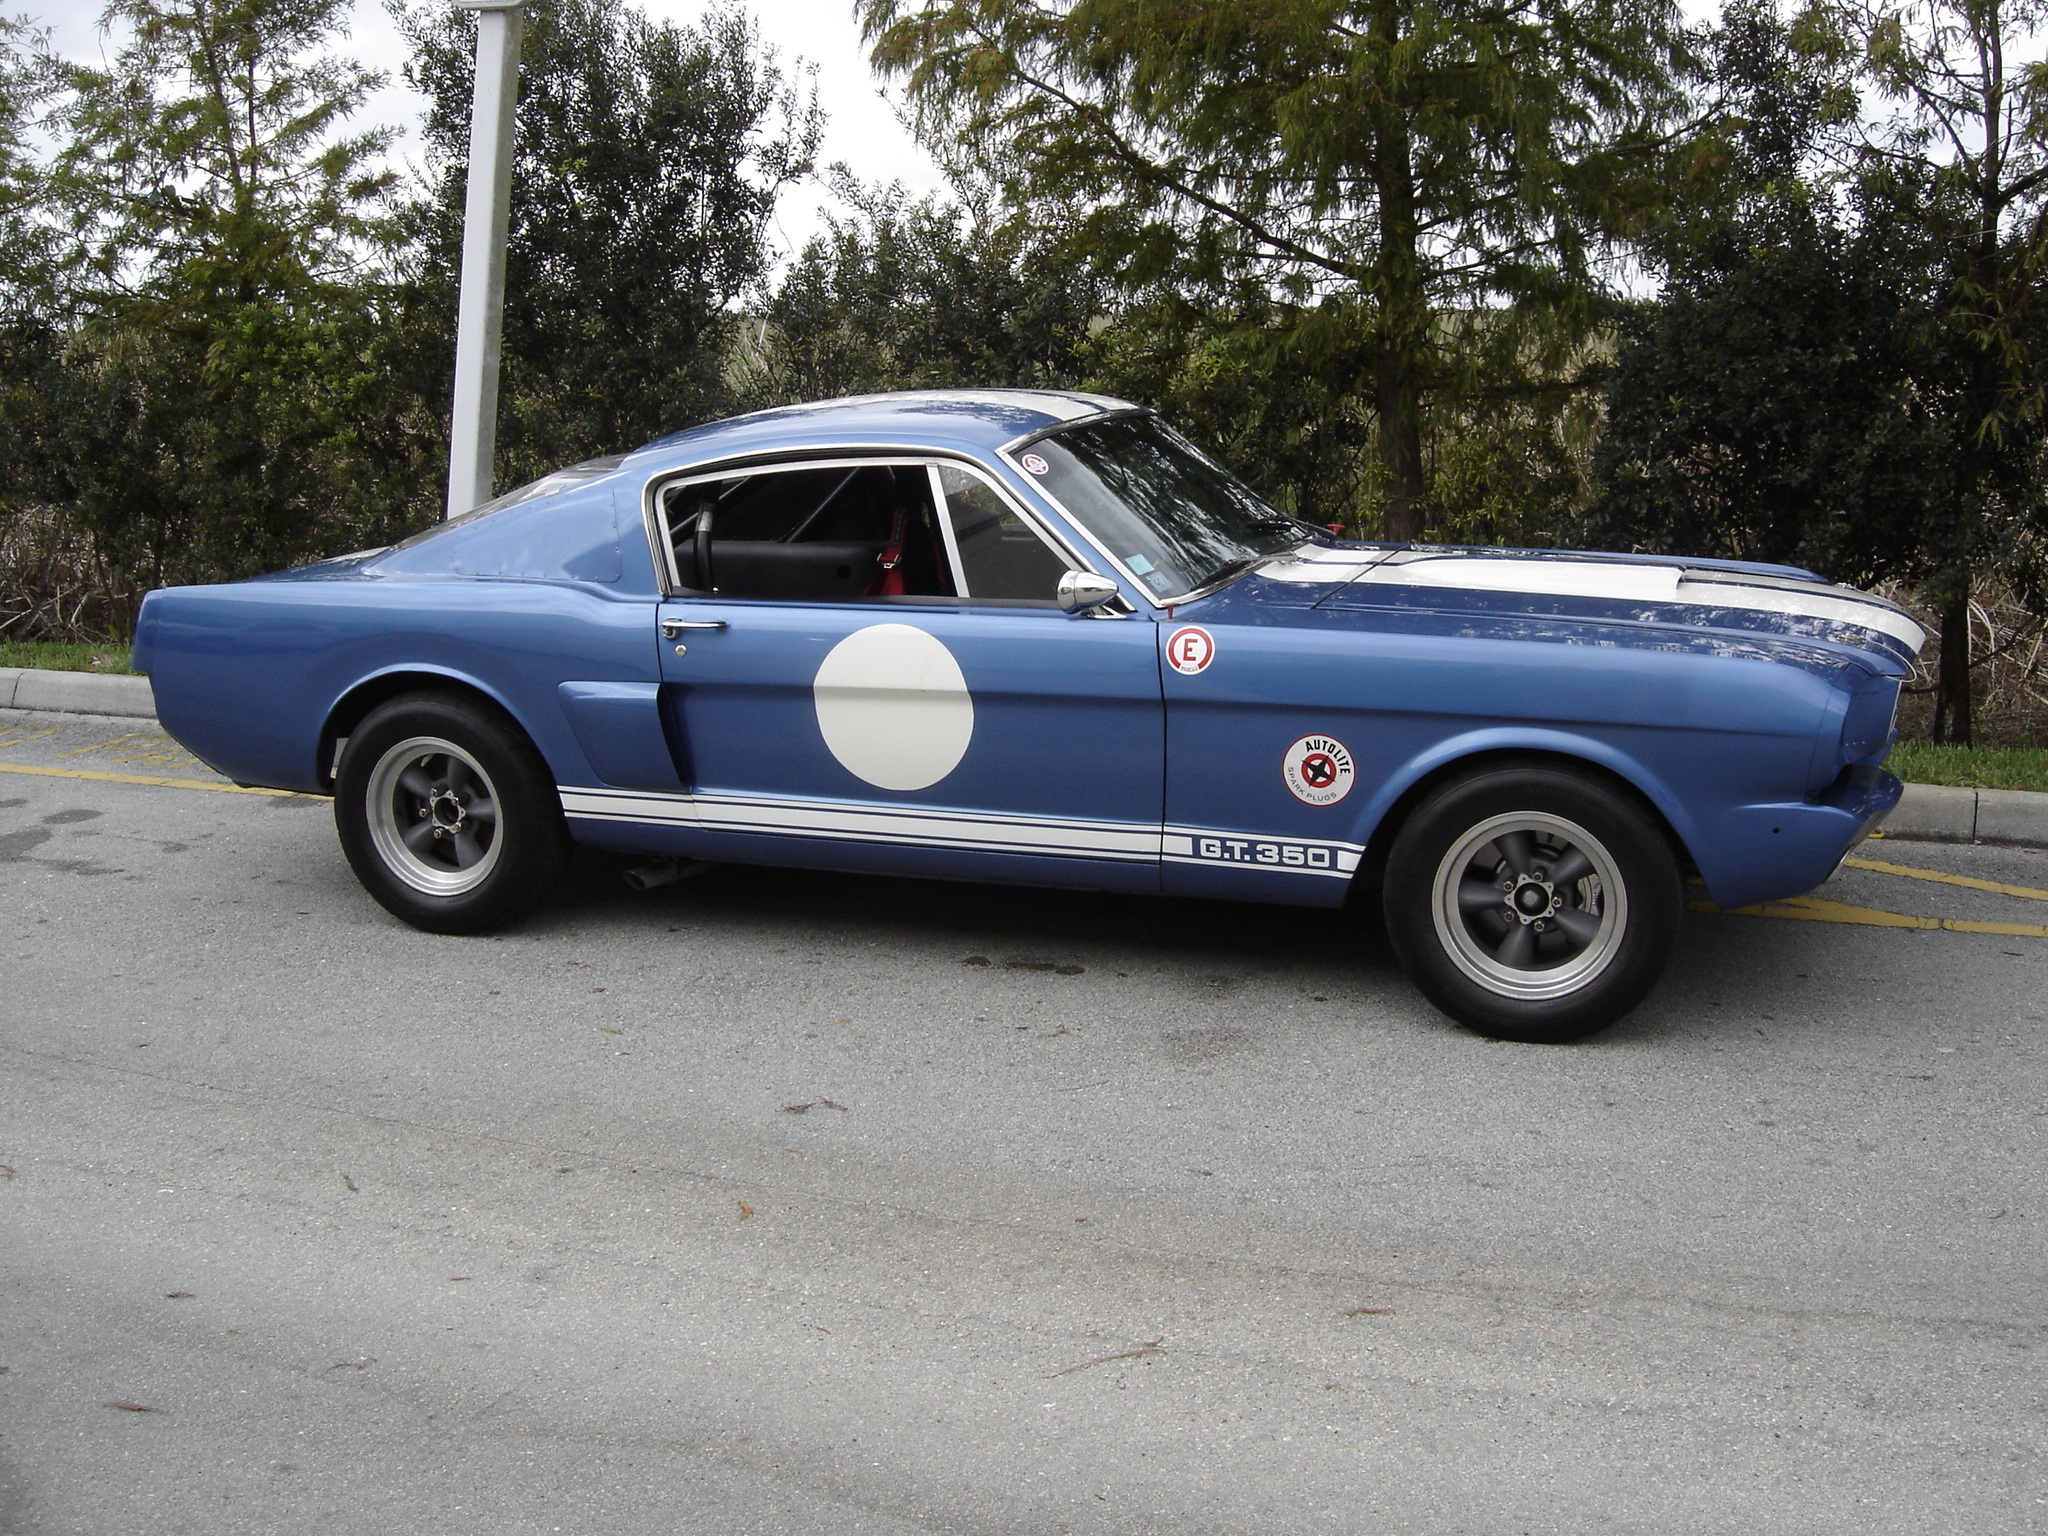  Desktop Wallpapers on Cars Road 1967 Race Ford Mustang Shelby Gt350 Fastback 1965 1966 Gt